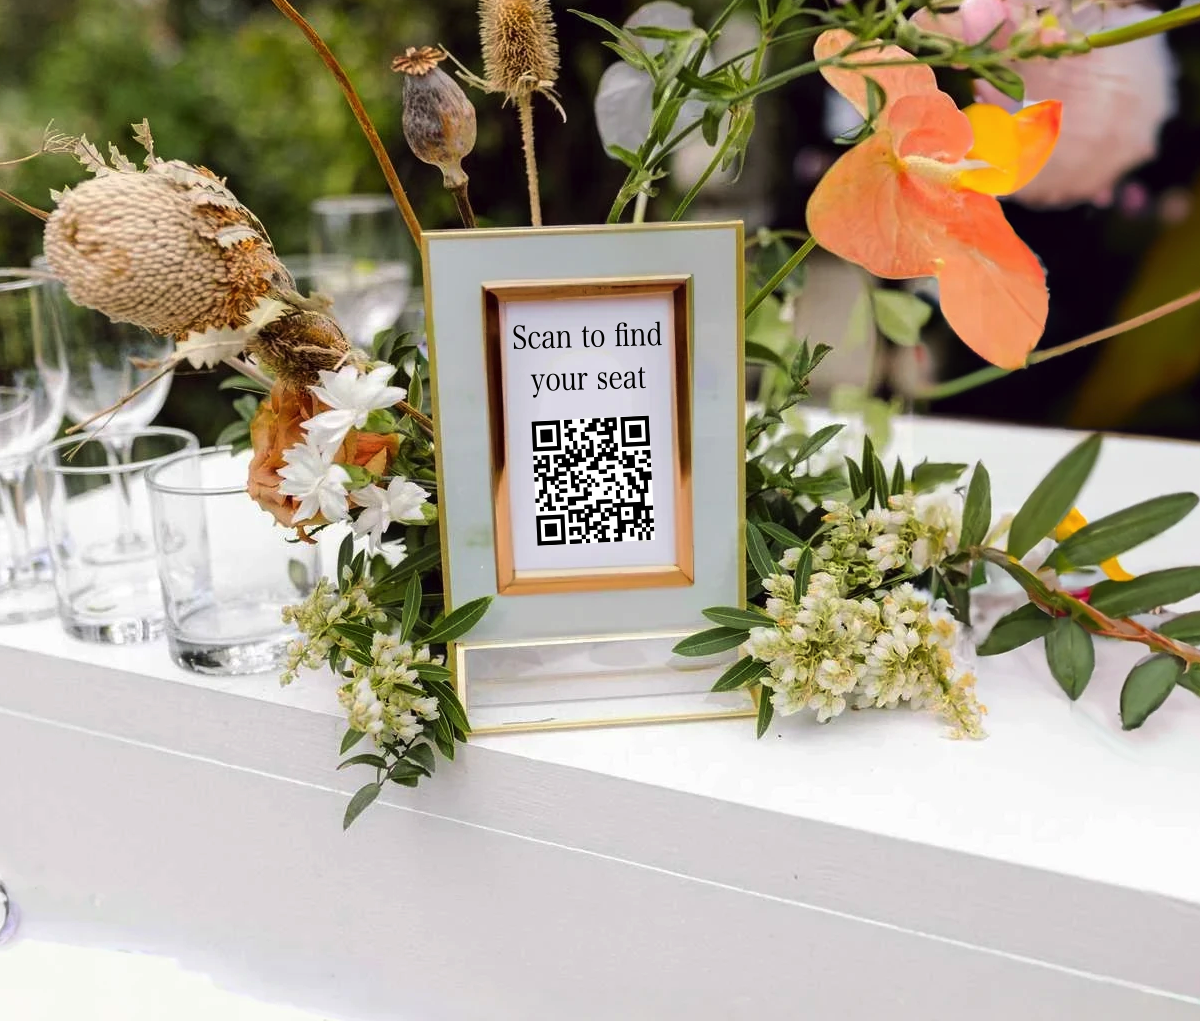 Example of a QR code in a photo frame